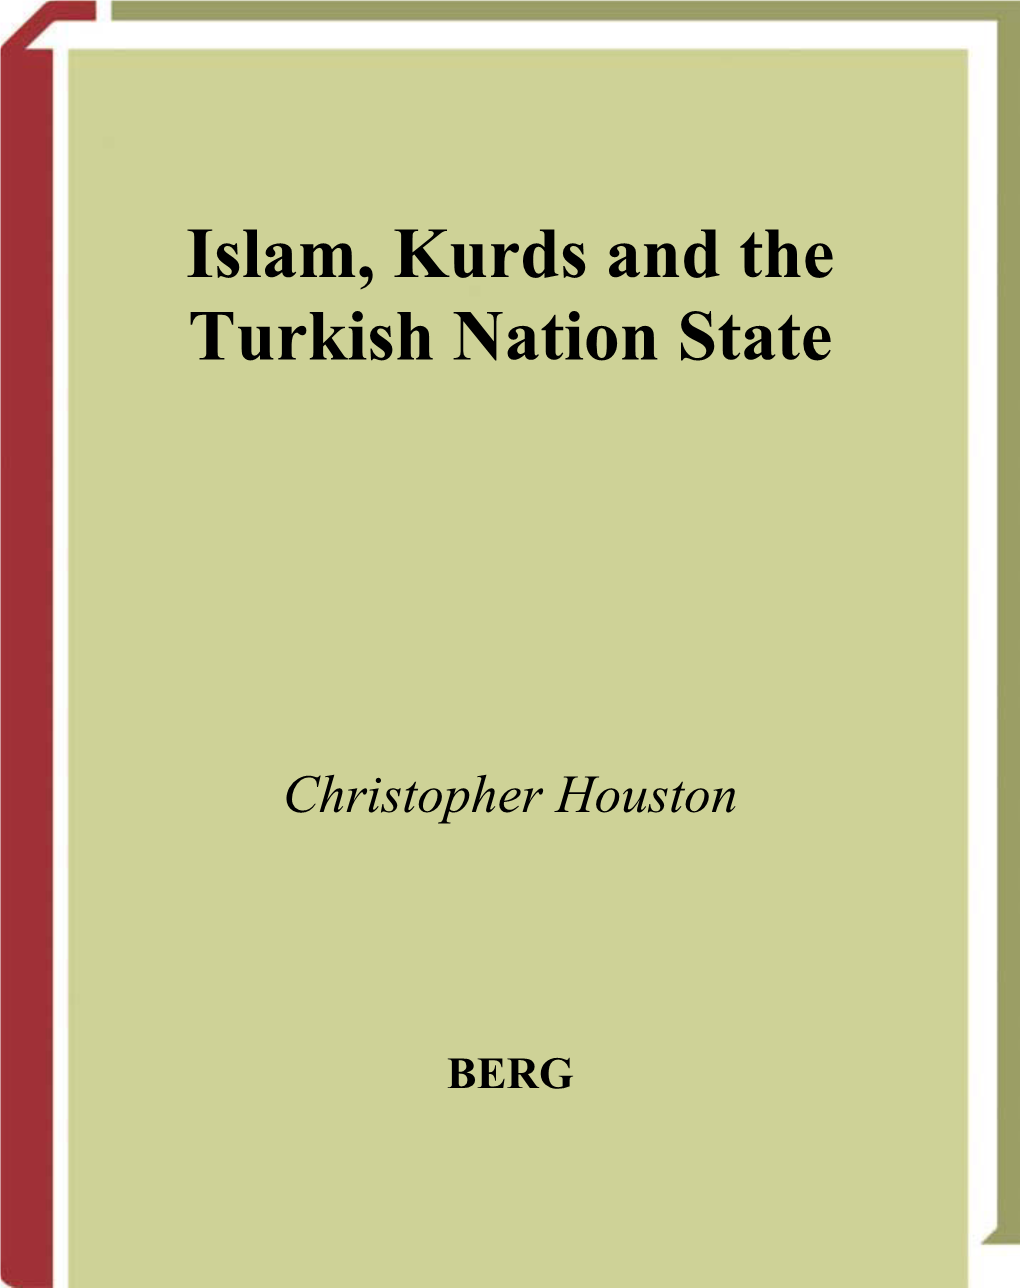 Christopher Houston-Islam, Kurds and the Turkish Nation State